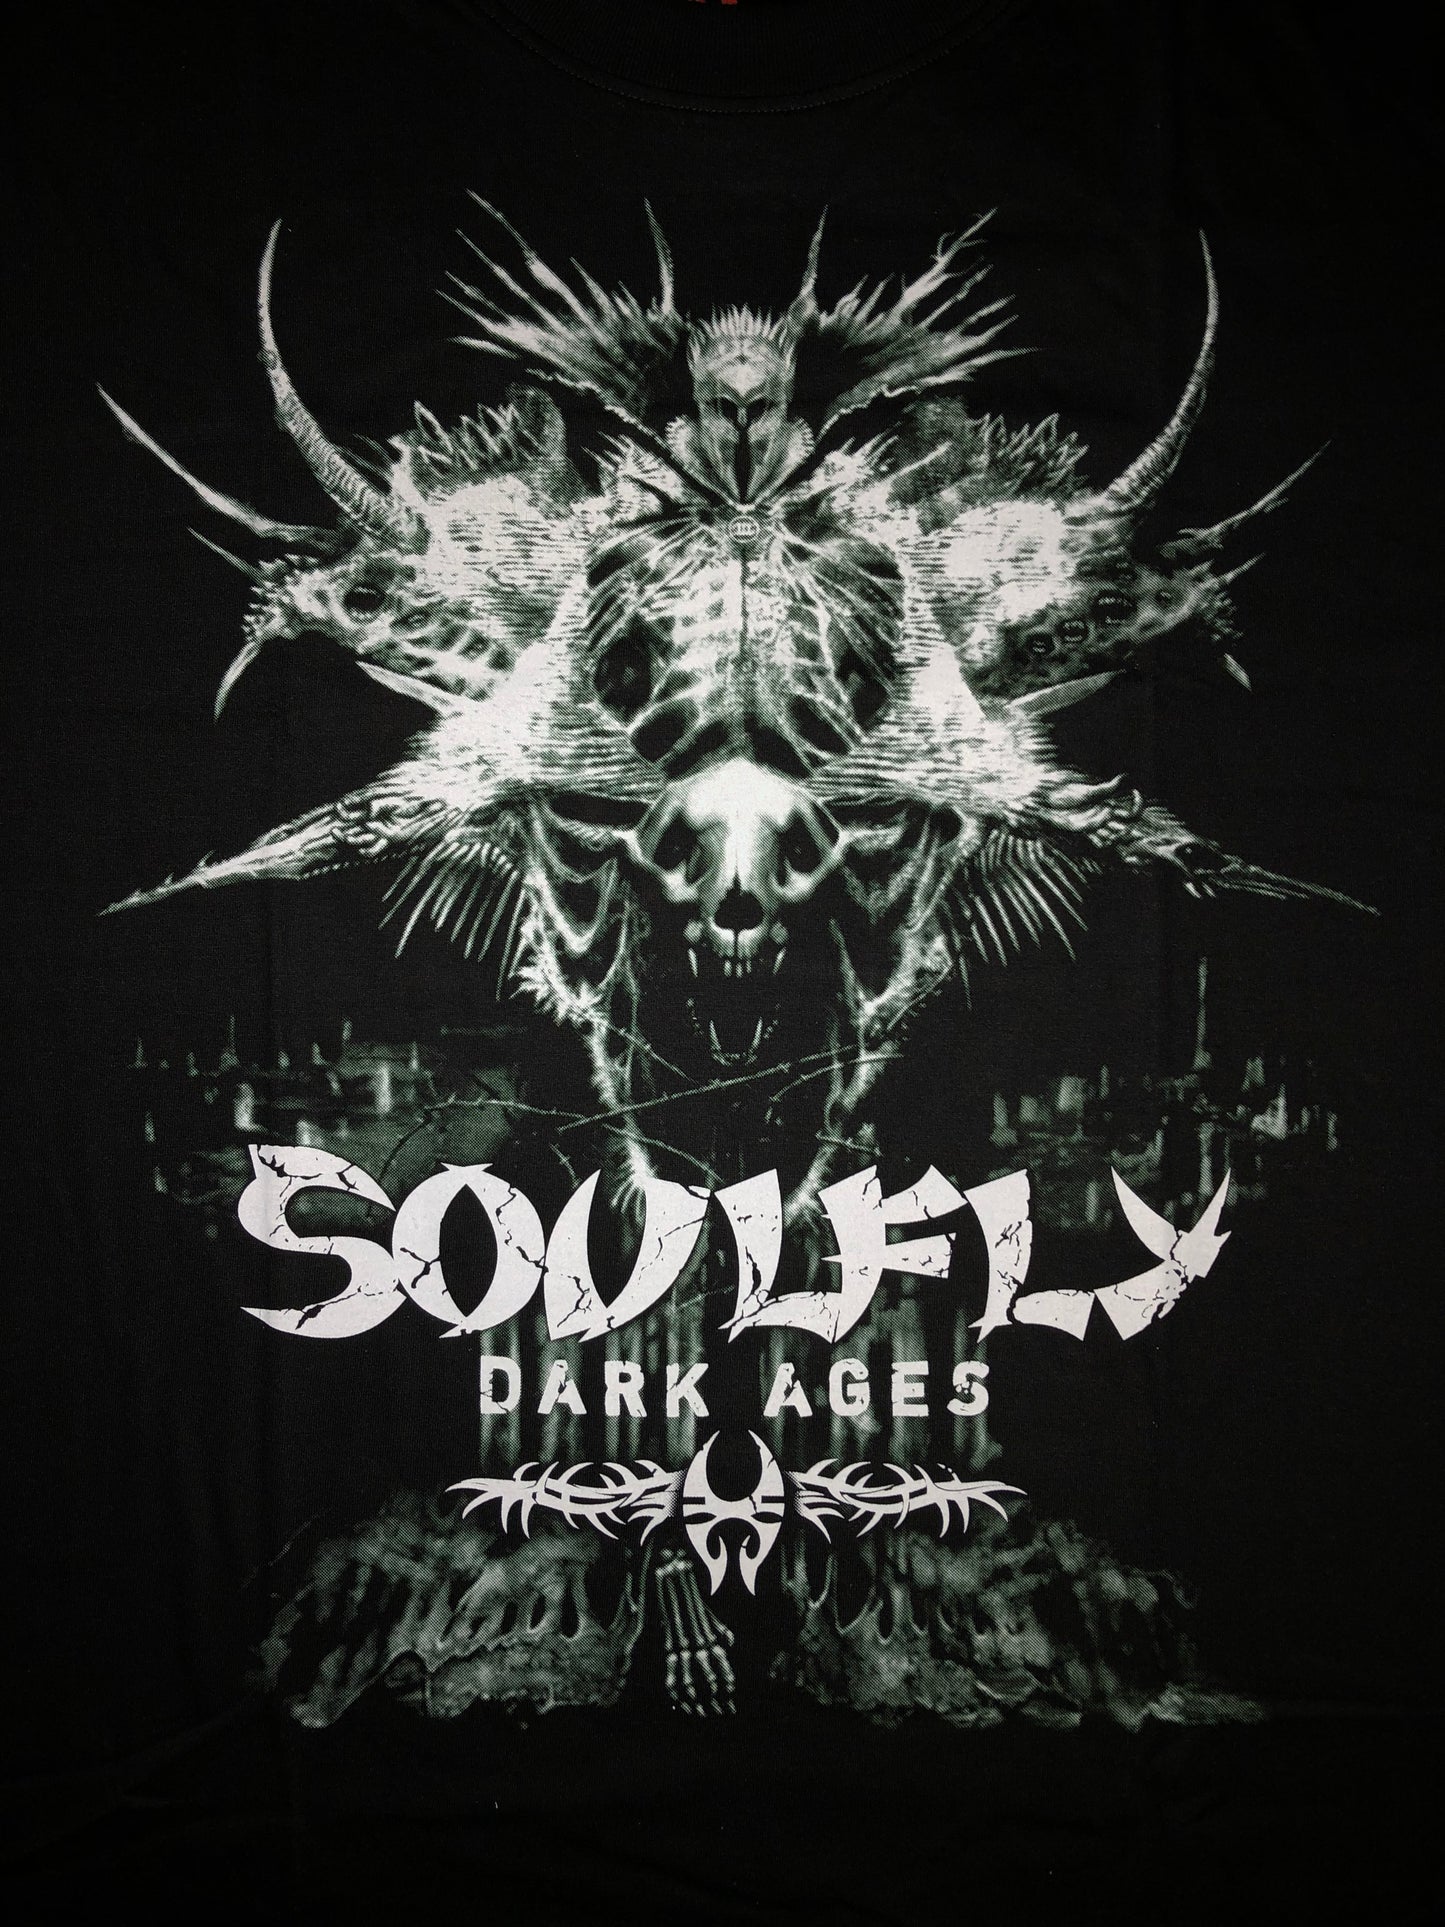 RCK203 - Soulfly - Dark Ages